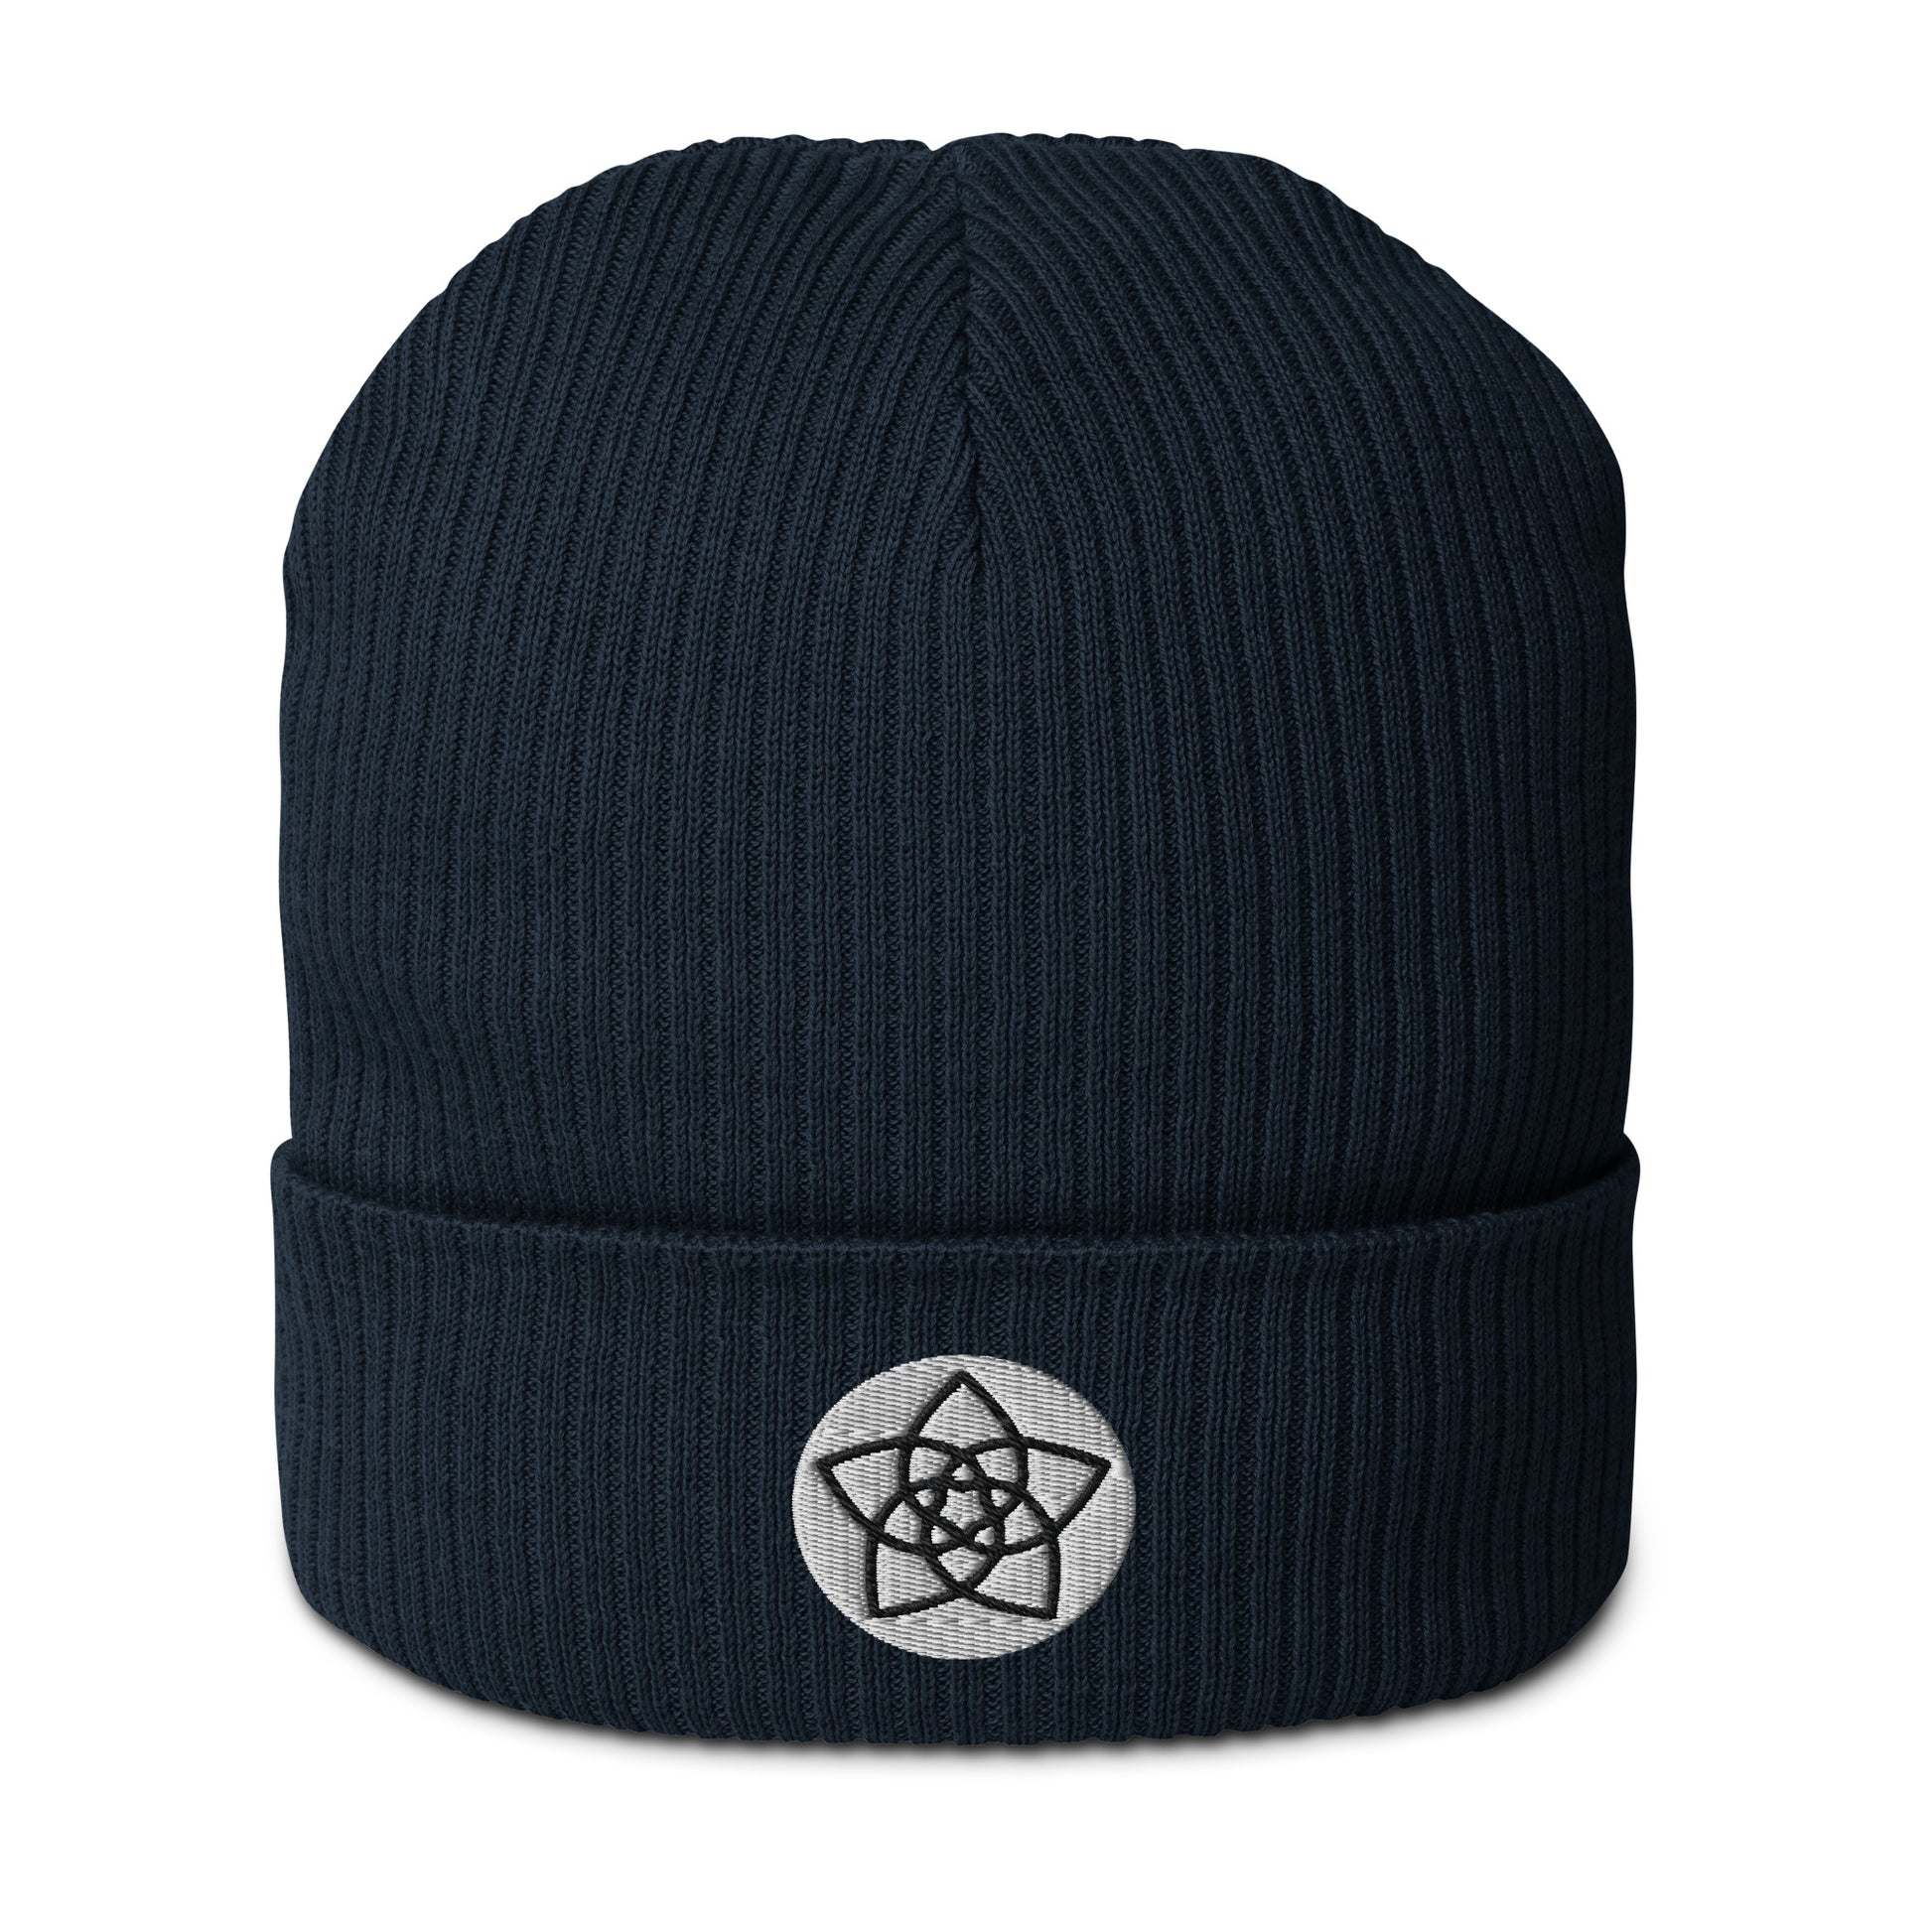  Tune into your inner goddess with our Venus Flower Organic Cotton Beanie in Oxford Navy. Crafted from organic cotton and embroidered with the Venus Flower symbol, this beanie is a tribute to the divine feminine, blooming with unity, balance, and celestial connections. Plus, it's made with breathable, lightweight fabric and natural materials, ensuring you feel as light as a petal while you're on your celestial journey. Snatch one of these beanies and infuse your style with a touch of Venusian magic.